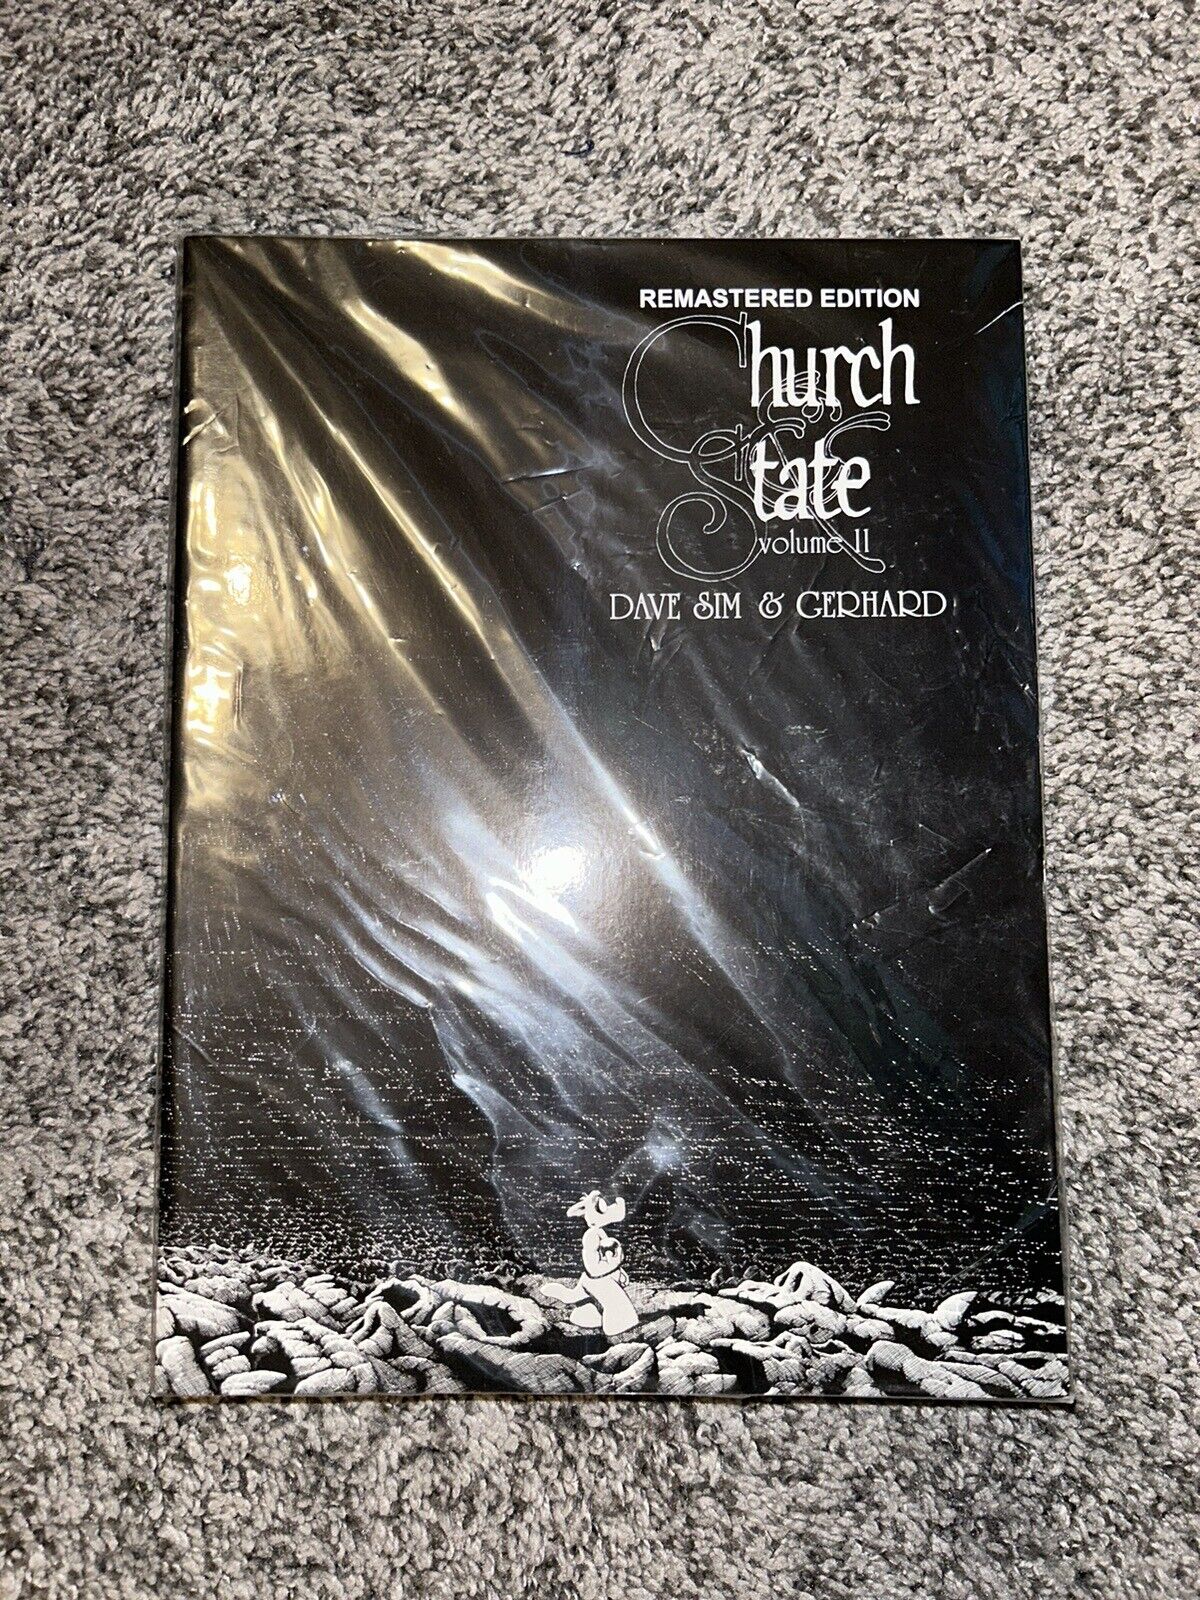 Cerebus Vol 4 Church & State II Remastered Edition New Sealed Phonebook Dave Sim